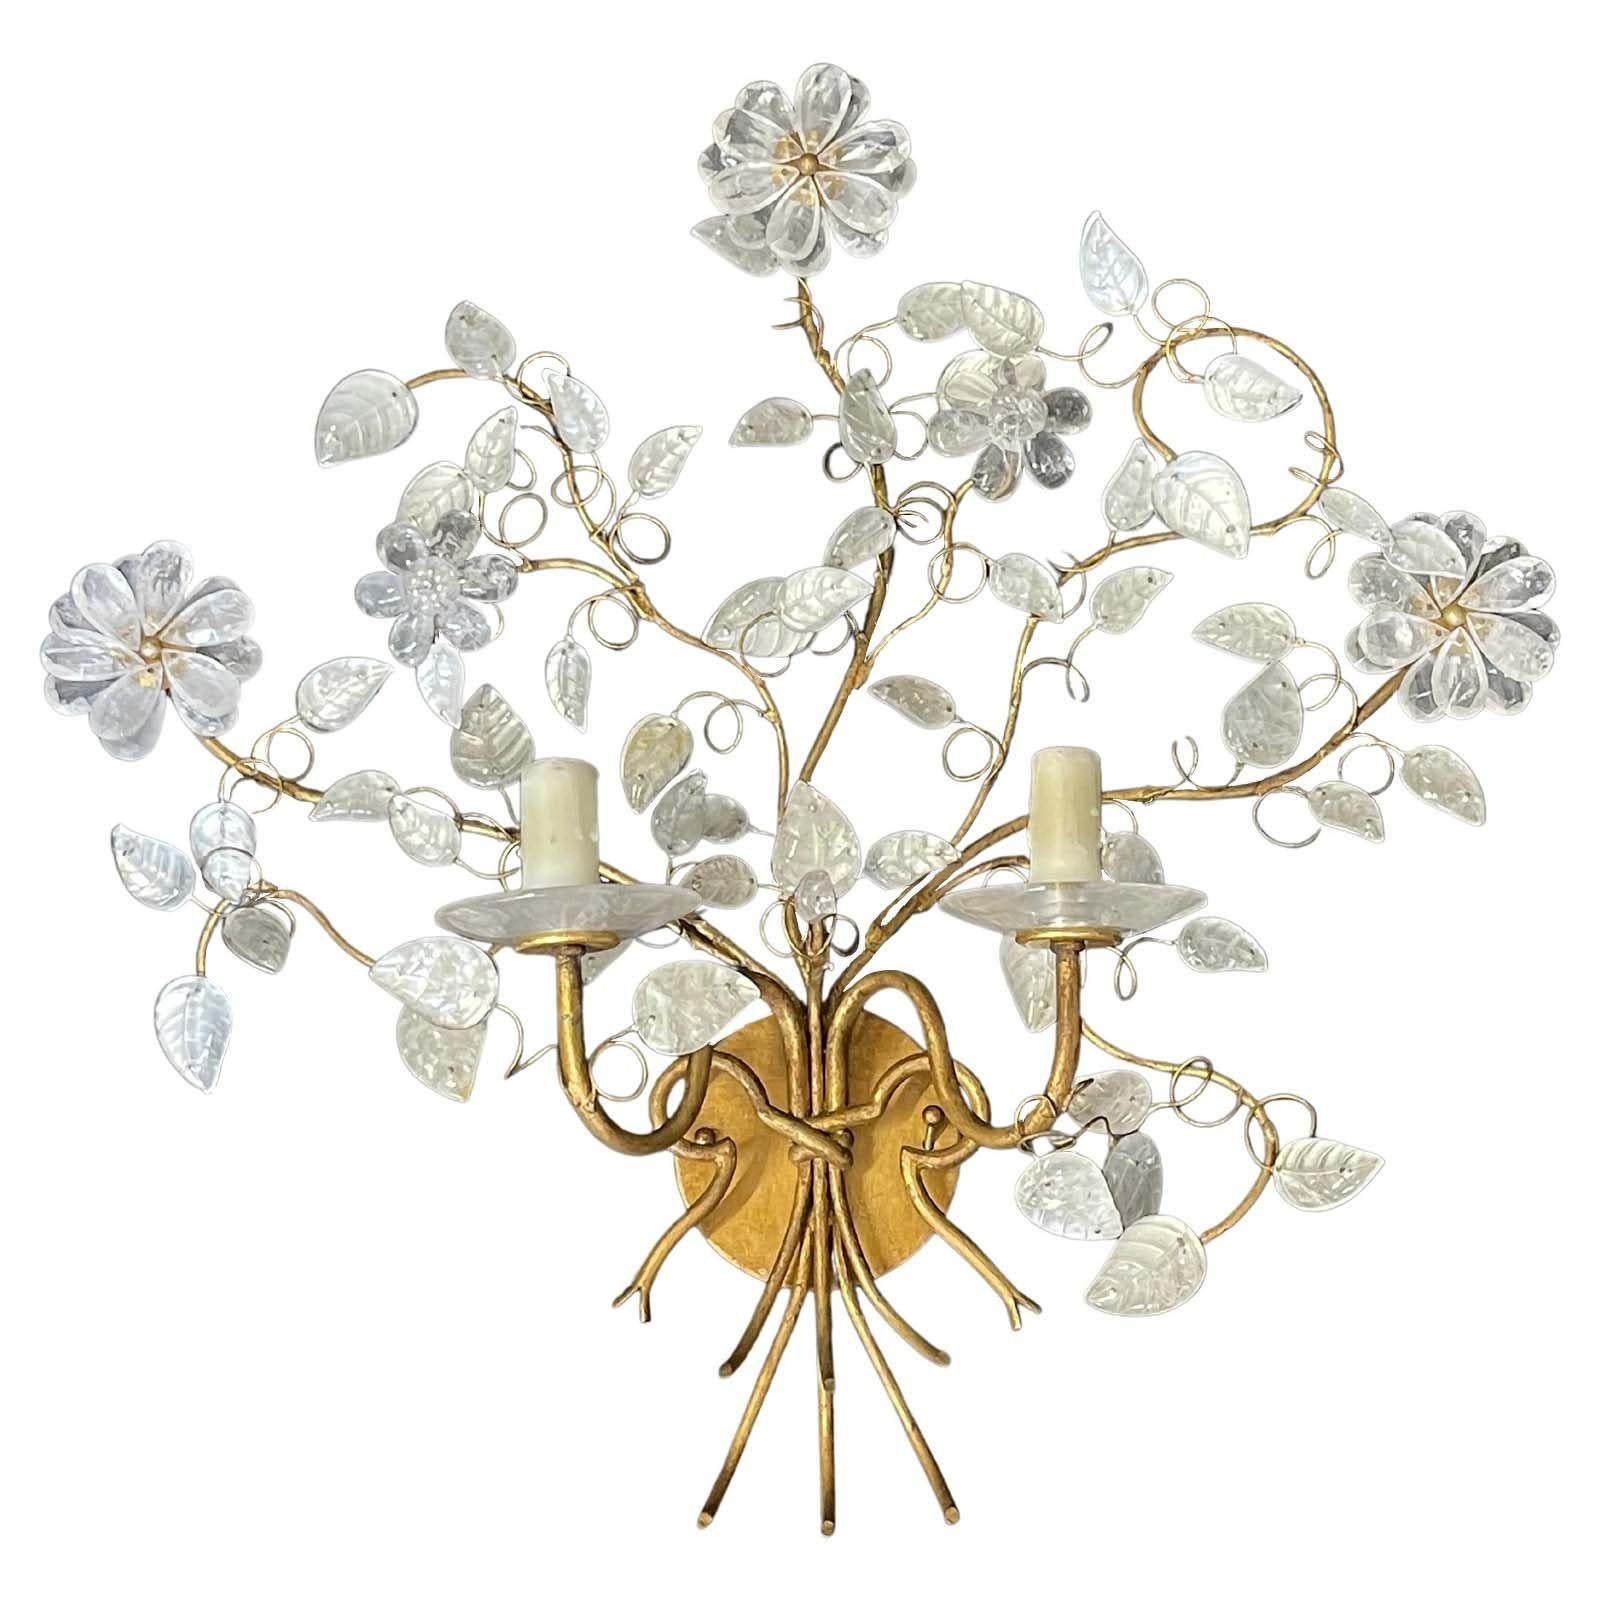 Pair of Maison Baguès sconces with rock crystal leaf and flower details, and rock crystal bobèches. Made with gilt metal base that take form of stems. Made in France, 20th Century.
*UL Listed
Dimensions:
24